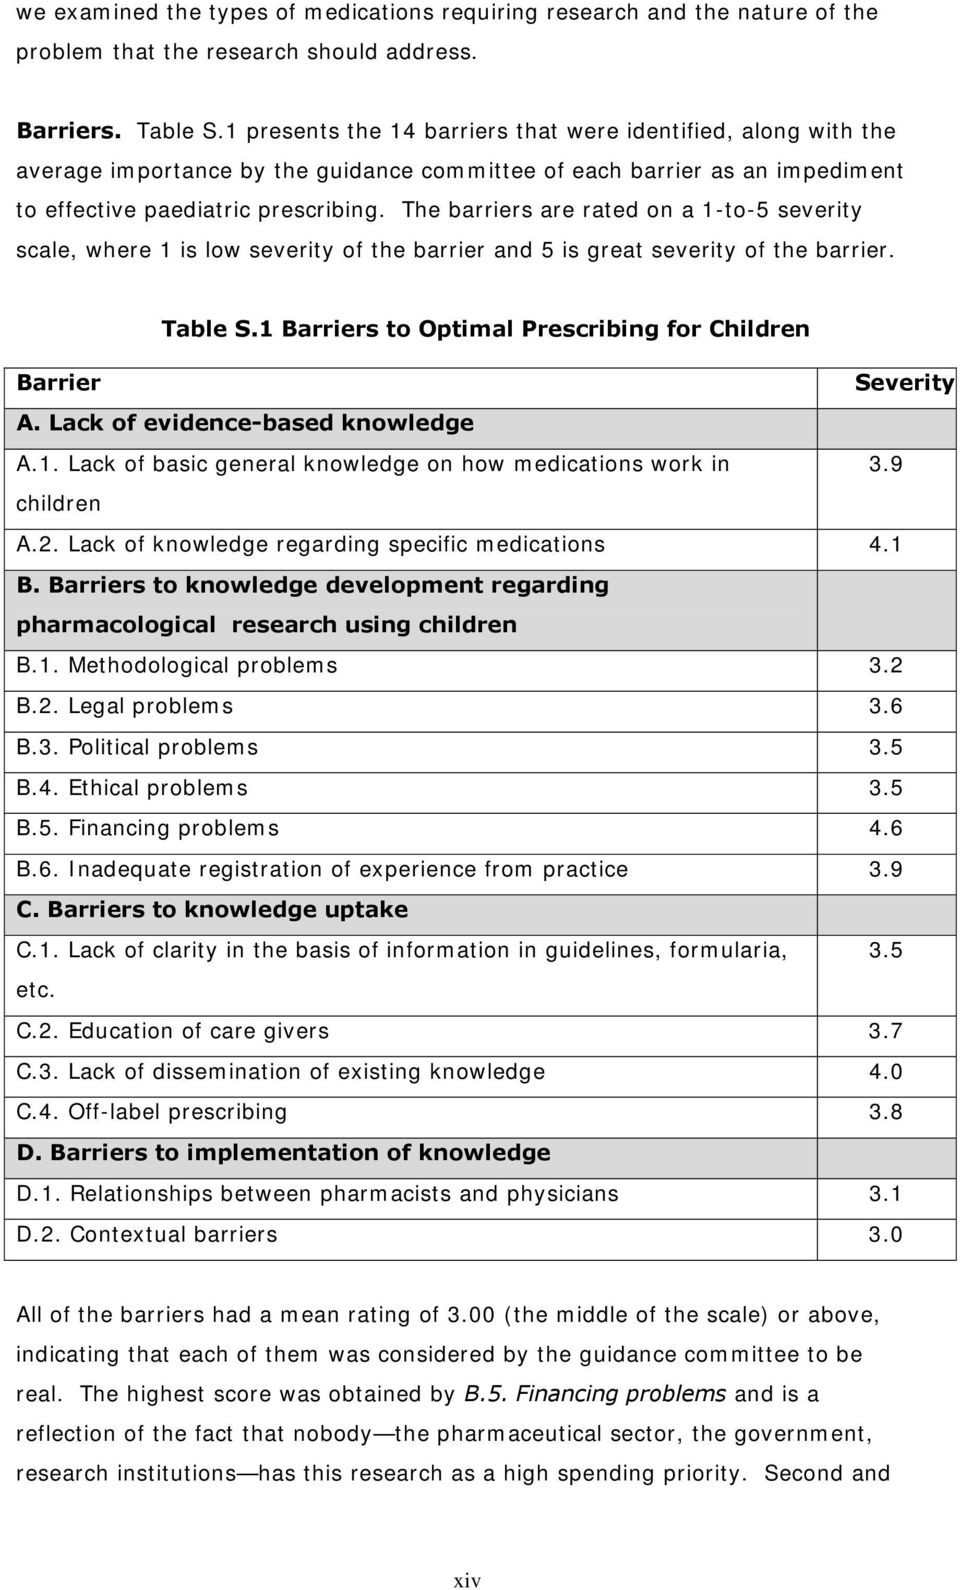 The barriers are rated on a 1-to-5 severity scale, where 1 is low severity of the barrier and 5 is great severity of the barrier. Table S.